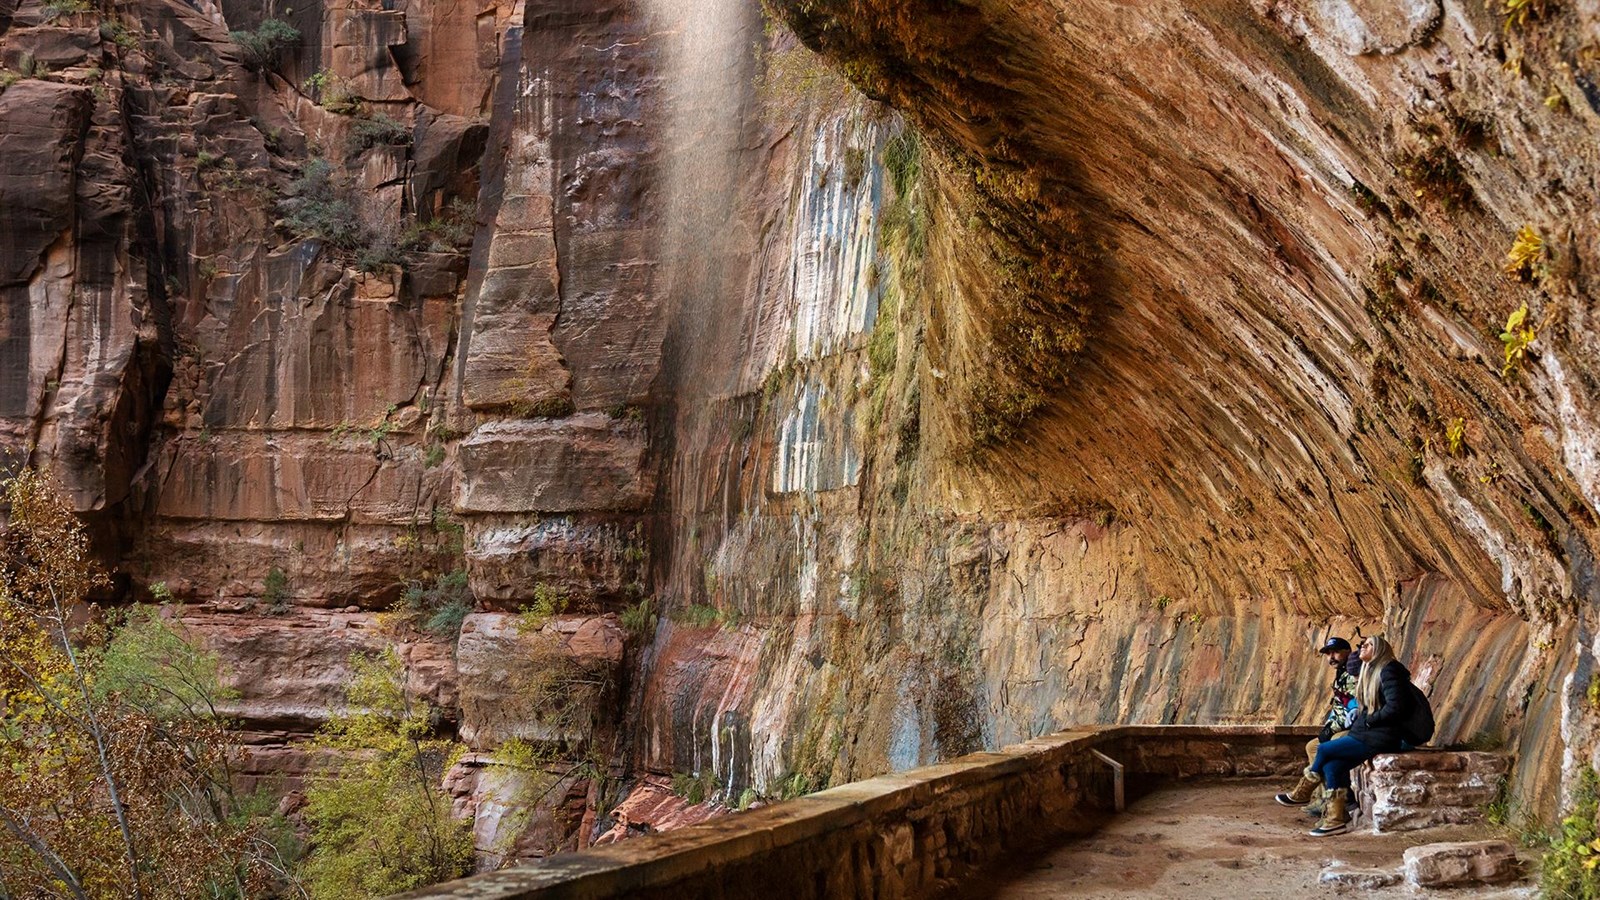 Two people sit in a rock alcove, with water dripping off the overhang in front of them.